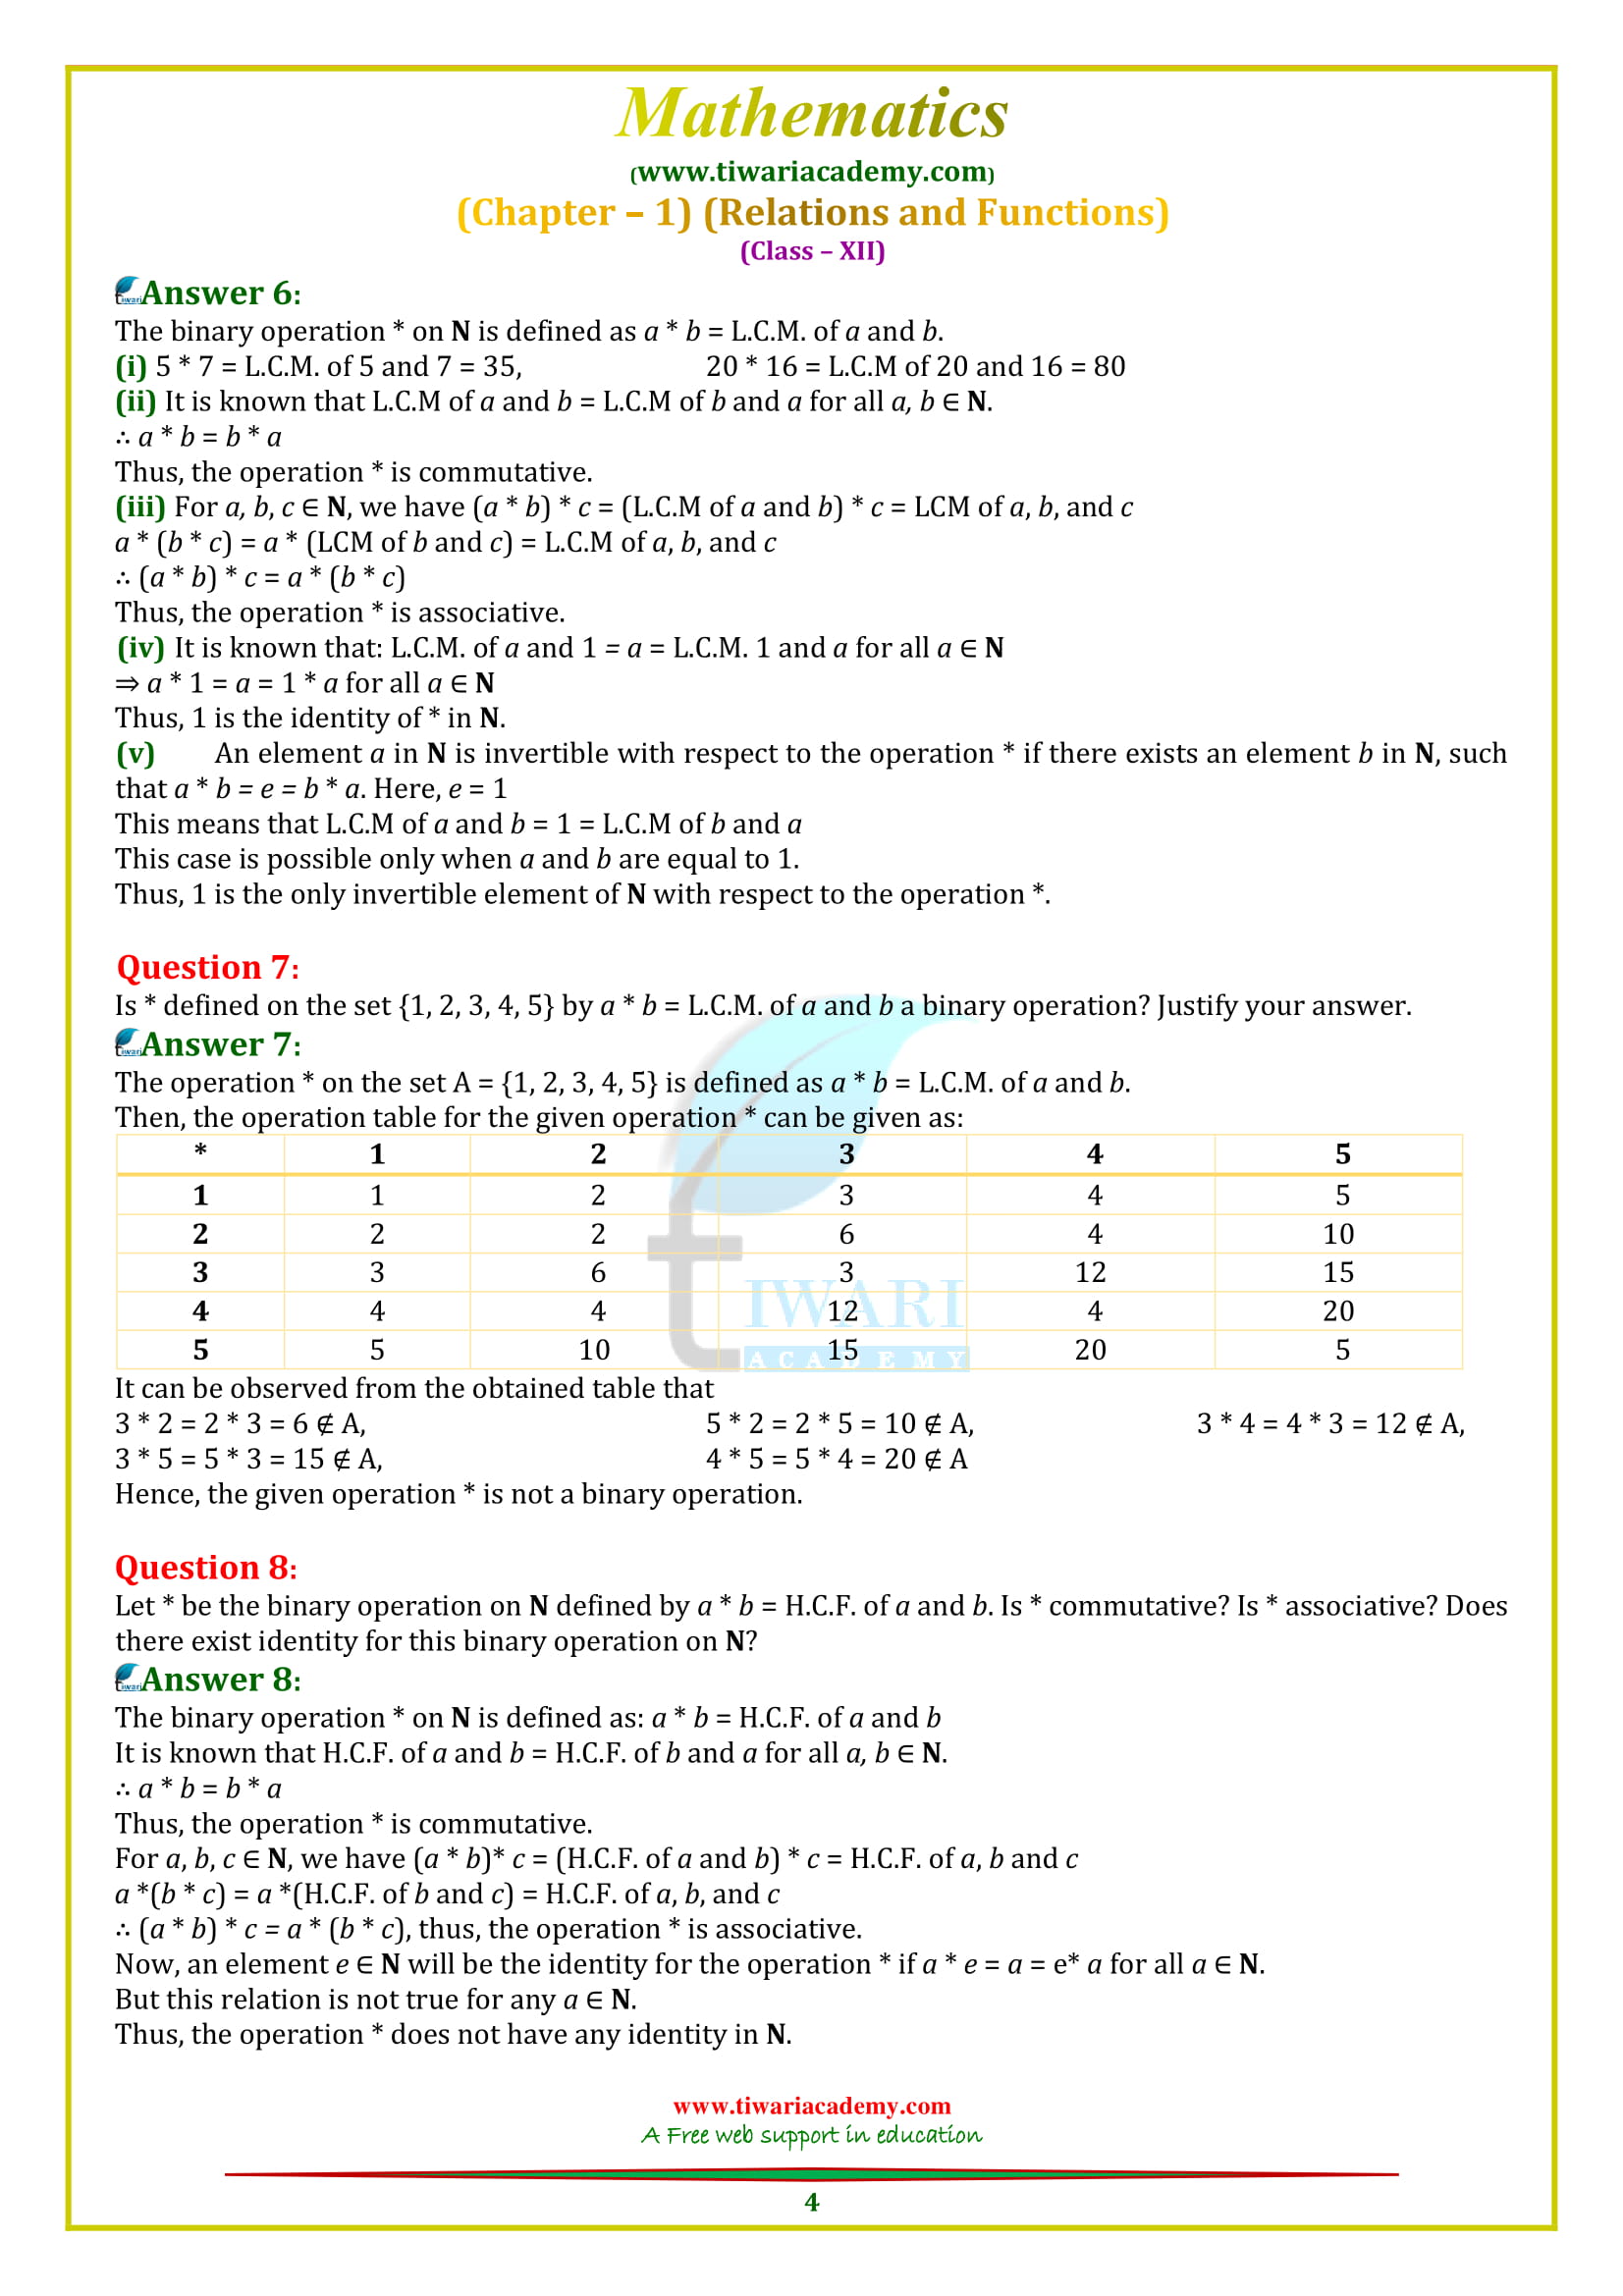 NCERT Solutions for Class 12 Maths Chapter 1 Exercise 1.4 for 2018-19 intermediuate students.